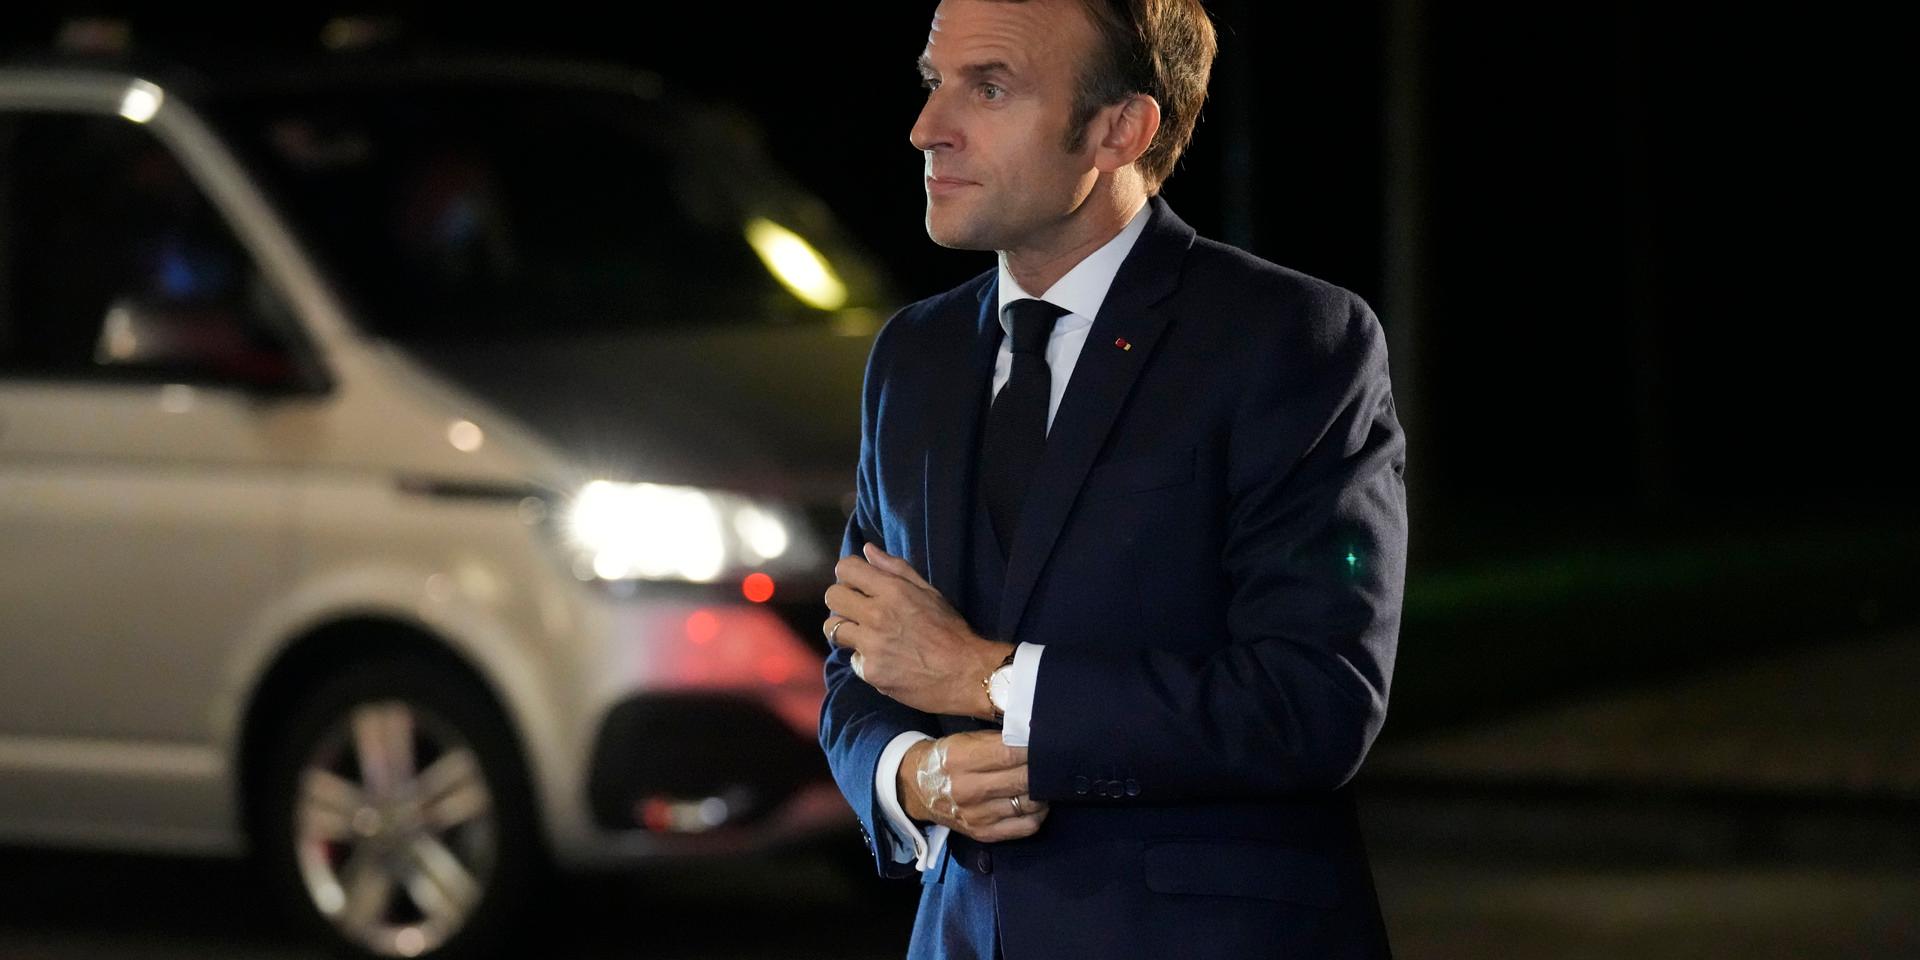 French President Emmanuel Macron arrives for a dinner event at an EU summit, at the Brdo Castle in Kranj, Slovenia, Tuesday, Oct. 5, 2021. EU leaders are meeting Tuesday evening to discuss increasingly tense relations with China and the security implications of the chaotic U.S.-led exit from Afghanistan, before taking part in a summit with Balkans leaders on Wednesday. (AP Photo/Darko Bandic)  VLM168